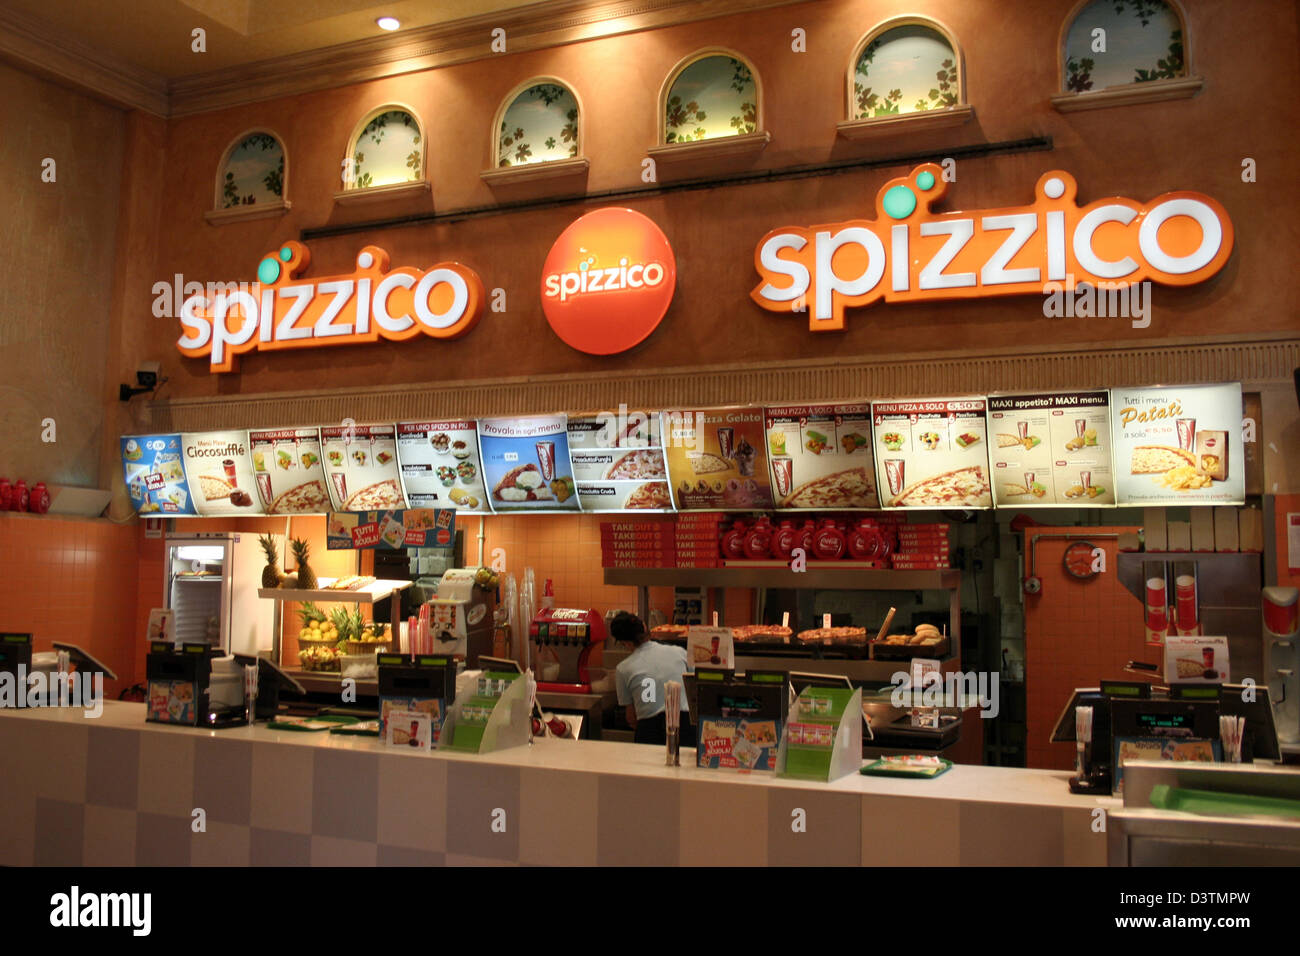 dpa file) - A restaurant of the fast food chain spizzico is pictured in Rome,  Italy, 23 September 2006. Photo: Lars Halbauer Stock Photo - Alamy